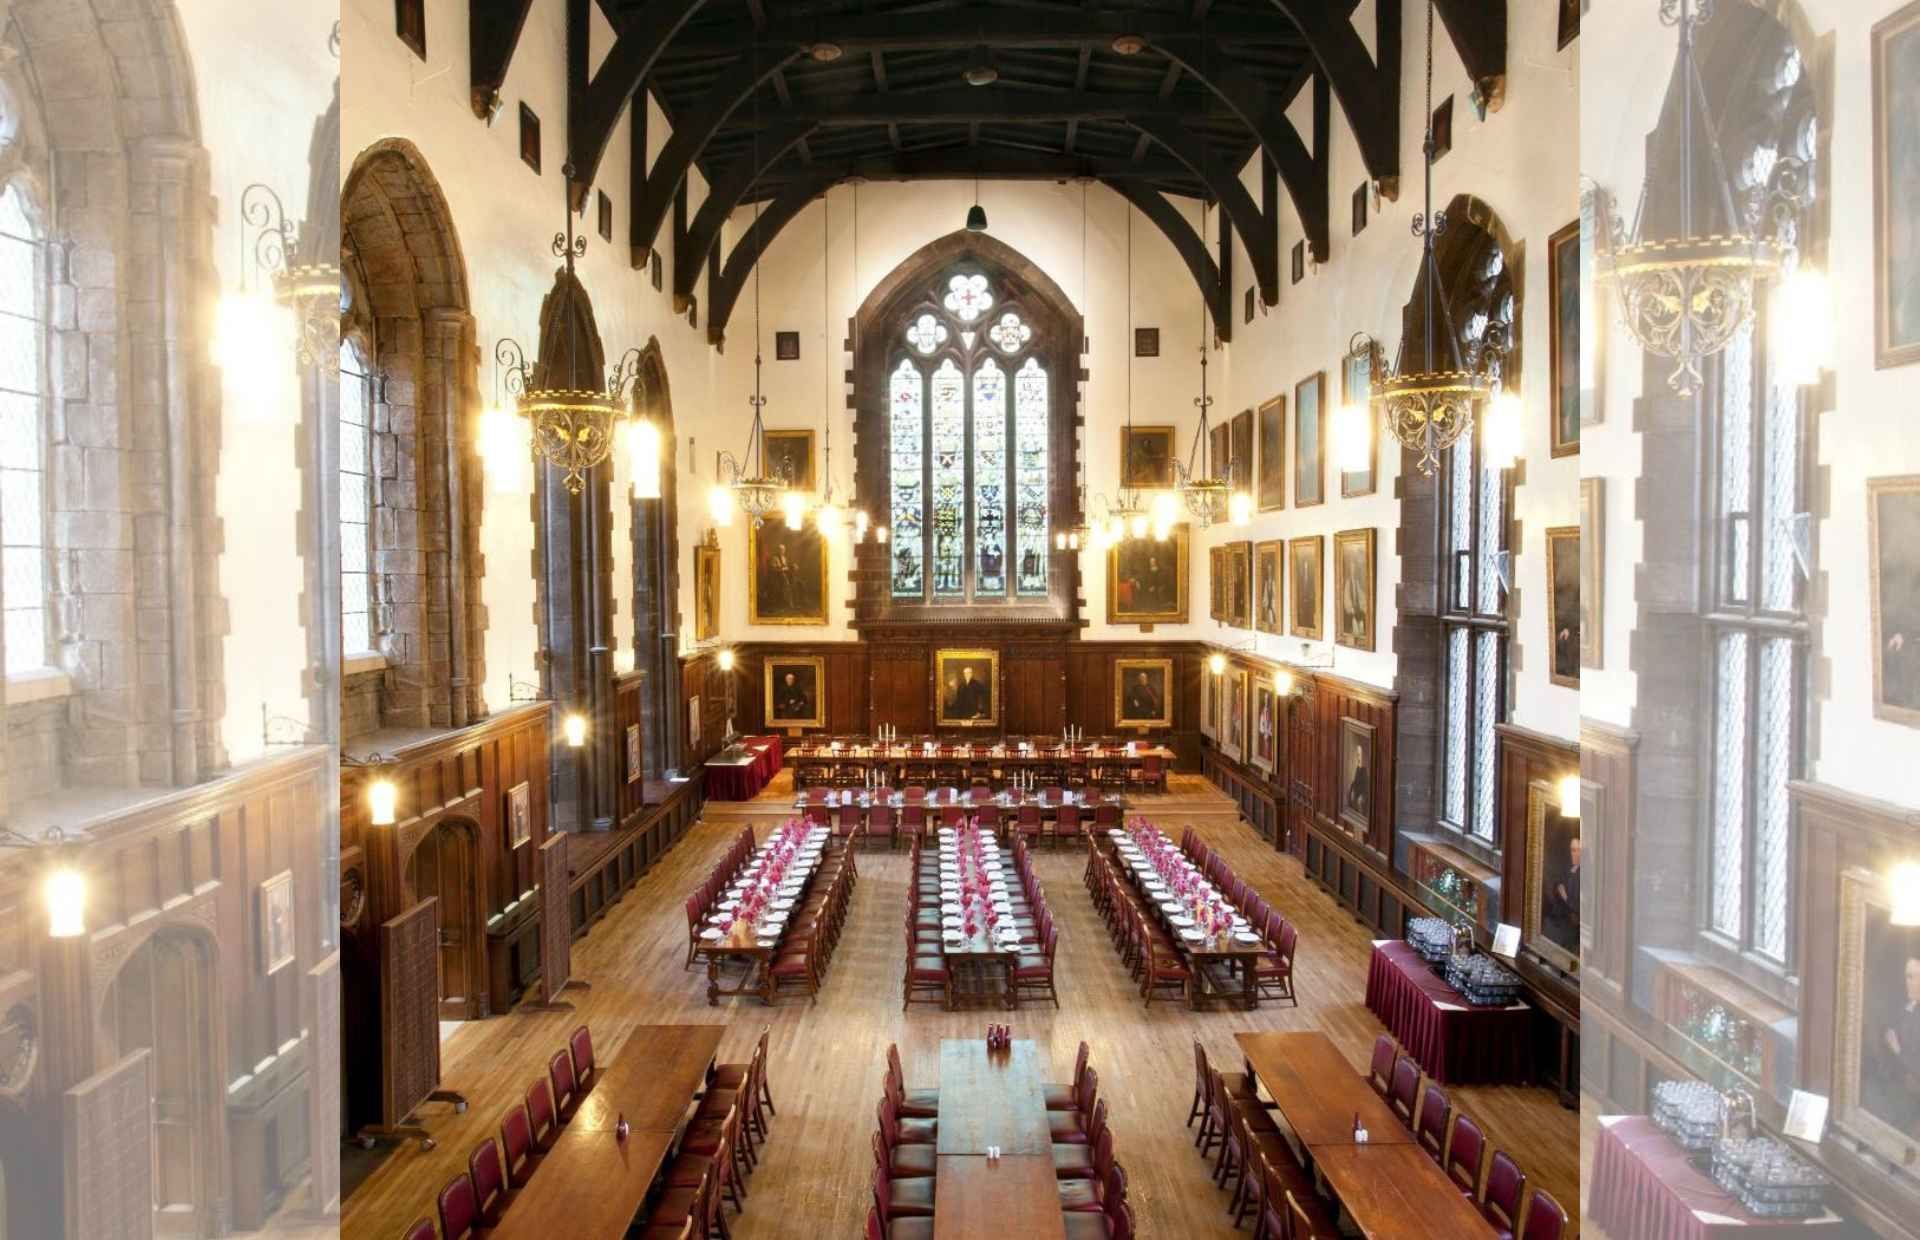 The Great Hall of Durham Castle, looking north towards the 19th-century-stained glass window. Tables are laid out in rows at the front of the picture.